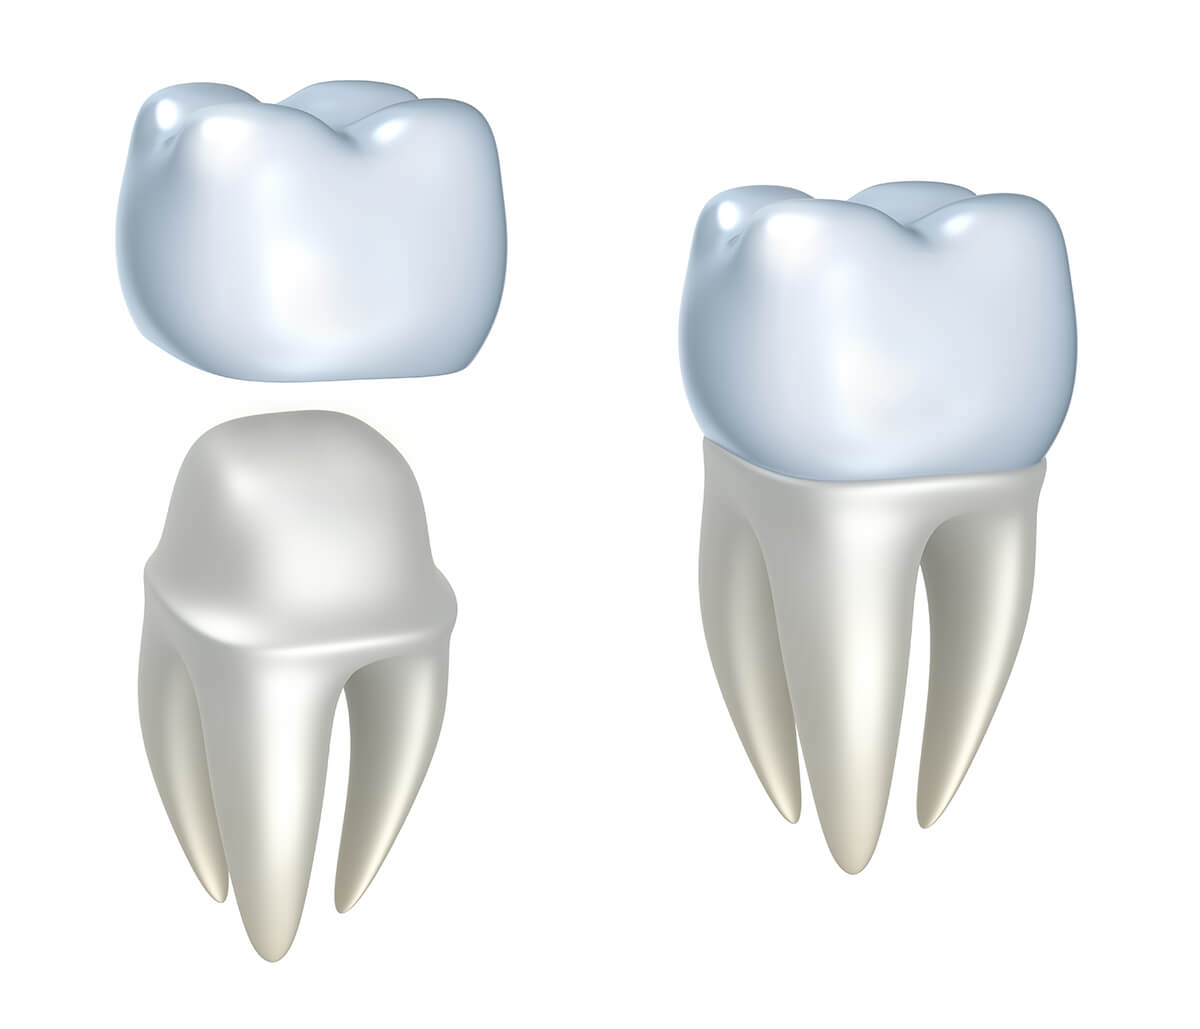 Natural Looking Dental Crowns in Fort Worth TX Area